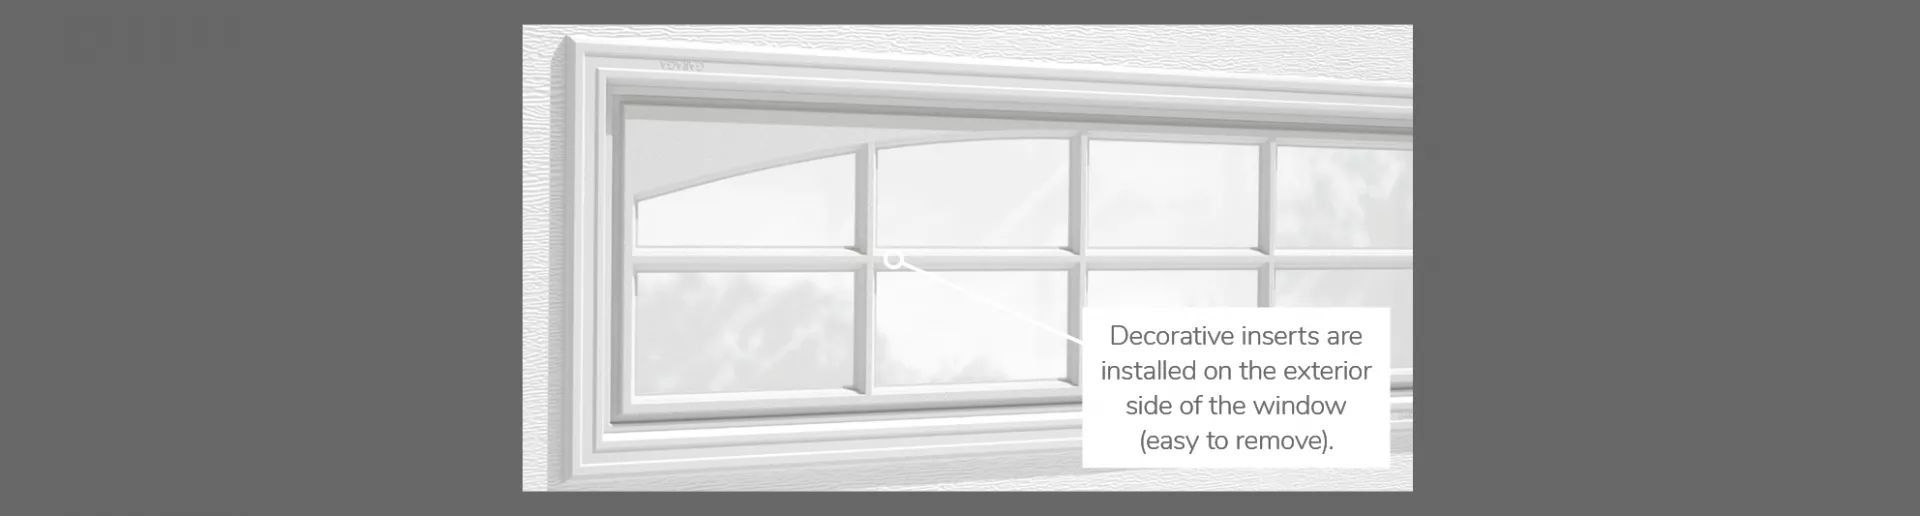 Double Stockton Arch Decorative Inserts, 40" x 13", available for door R-16, R-12, 2 layers - Polystyrene and Non-insulated